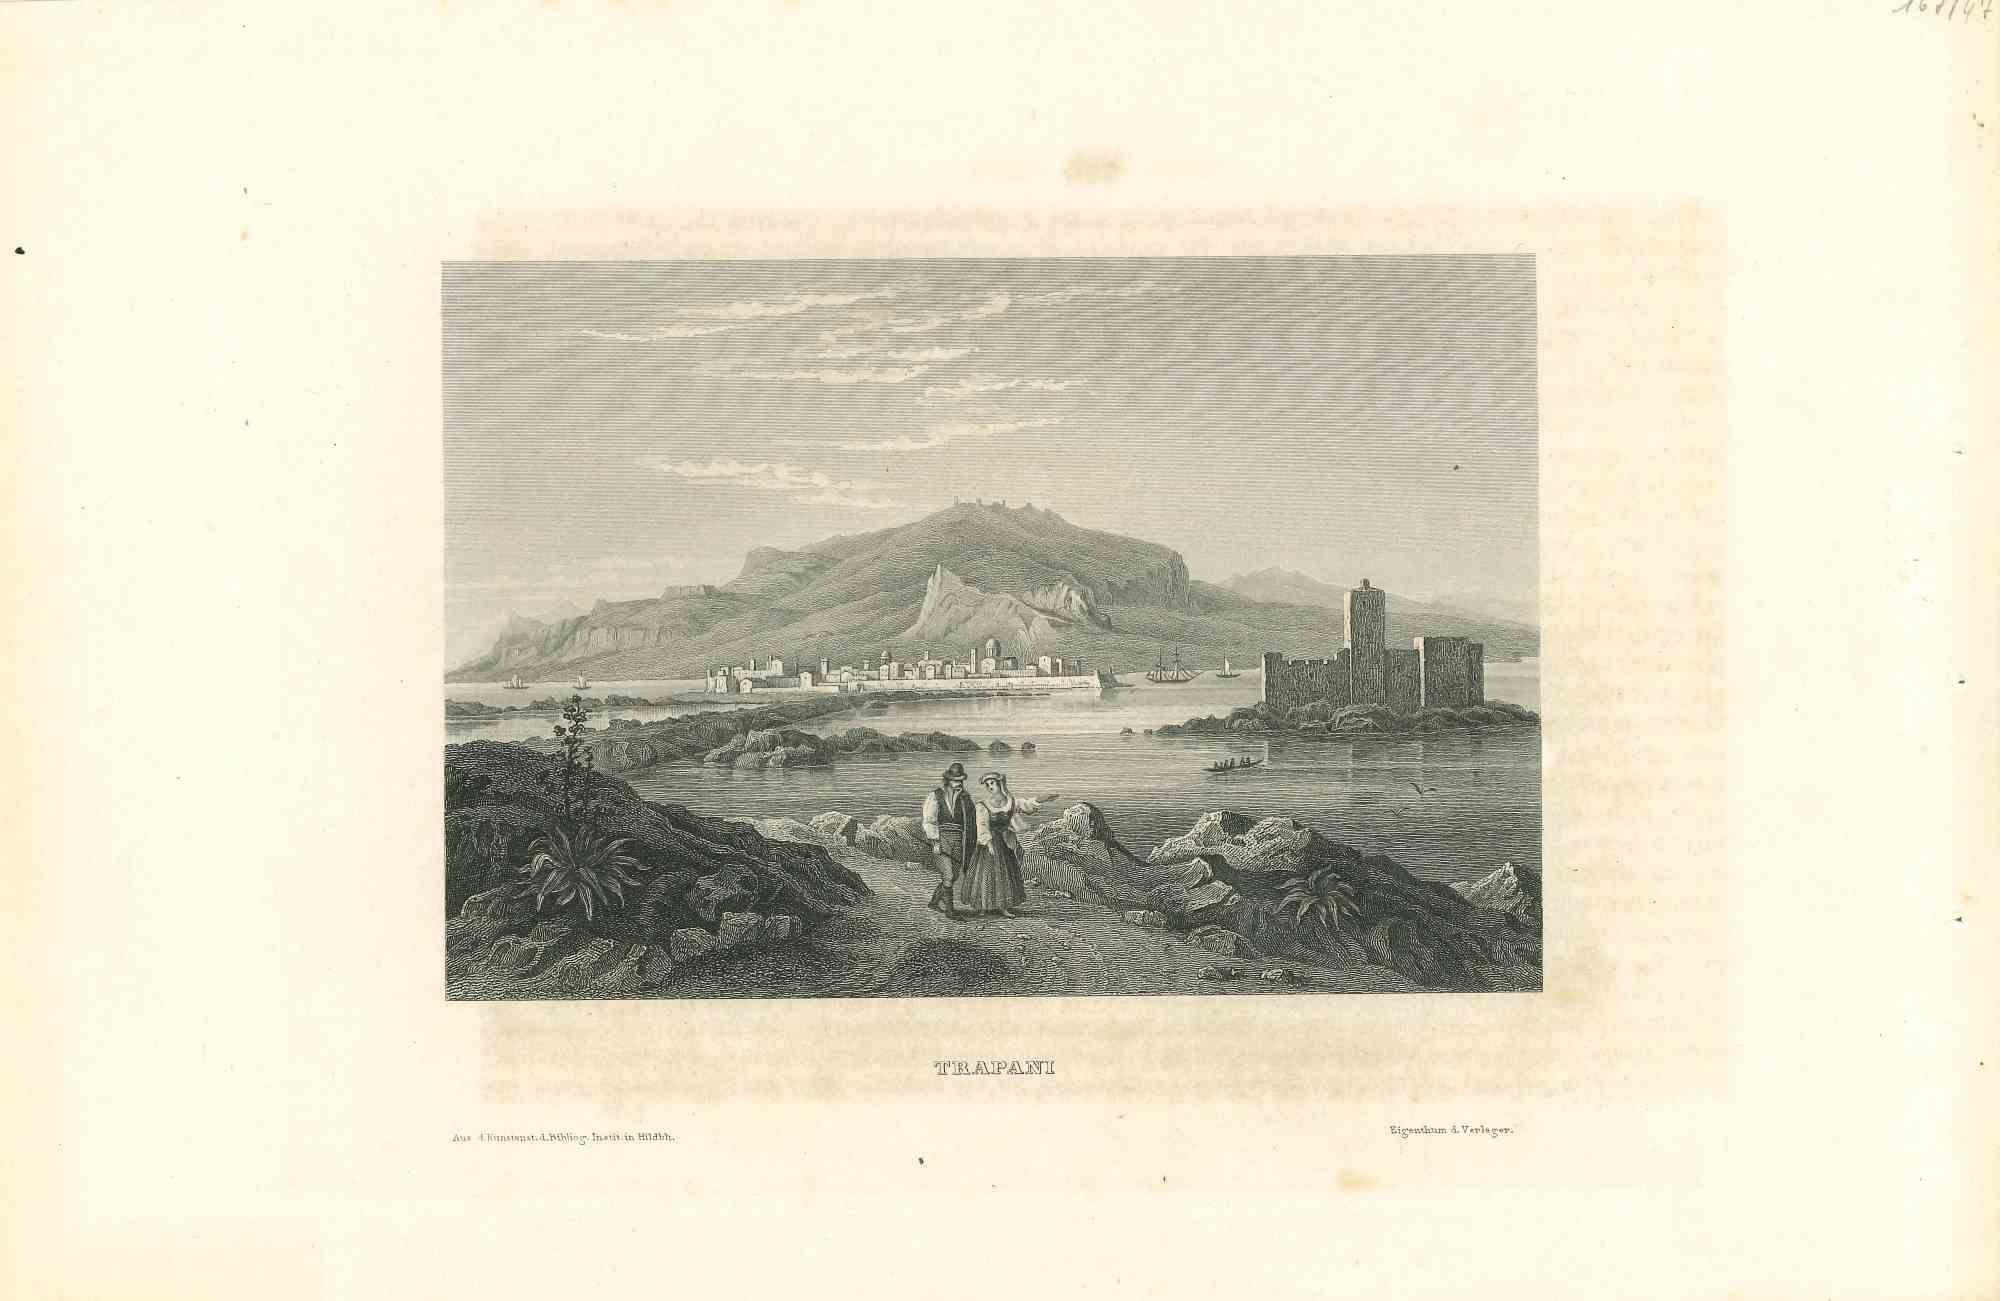 Unknown Landscape Print - Ancient View of Trapani - Original Lithograph - Mid 19th Century